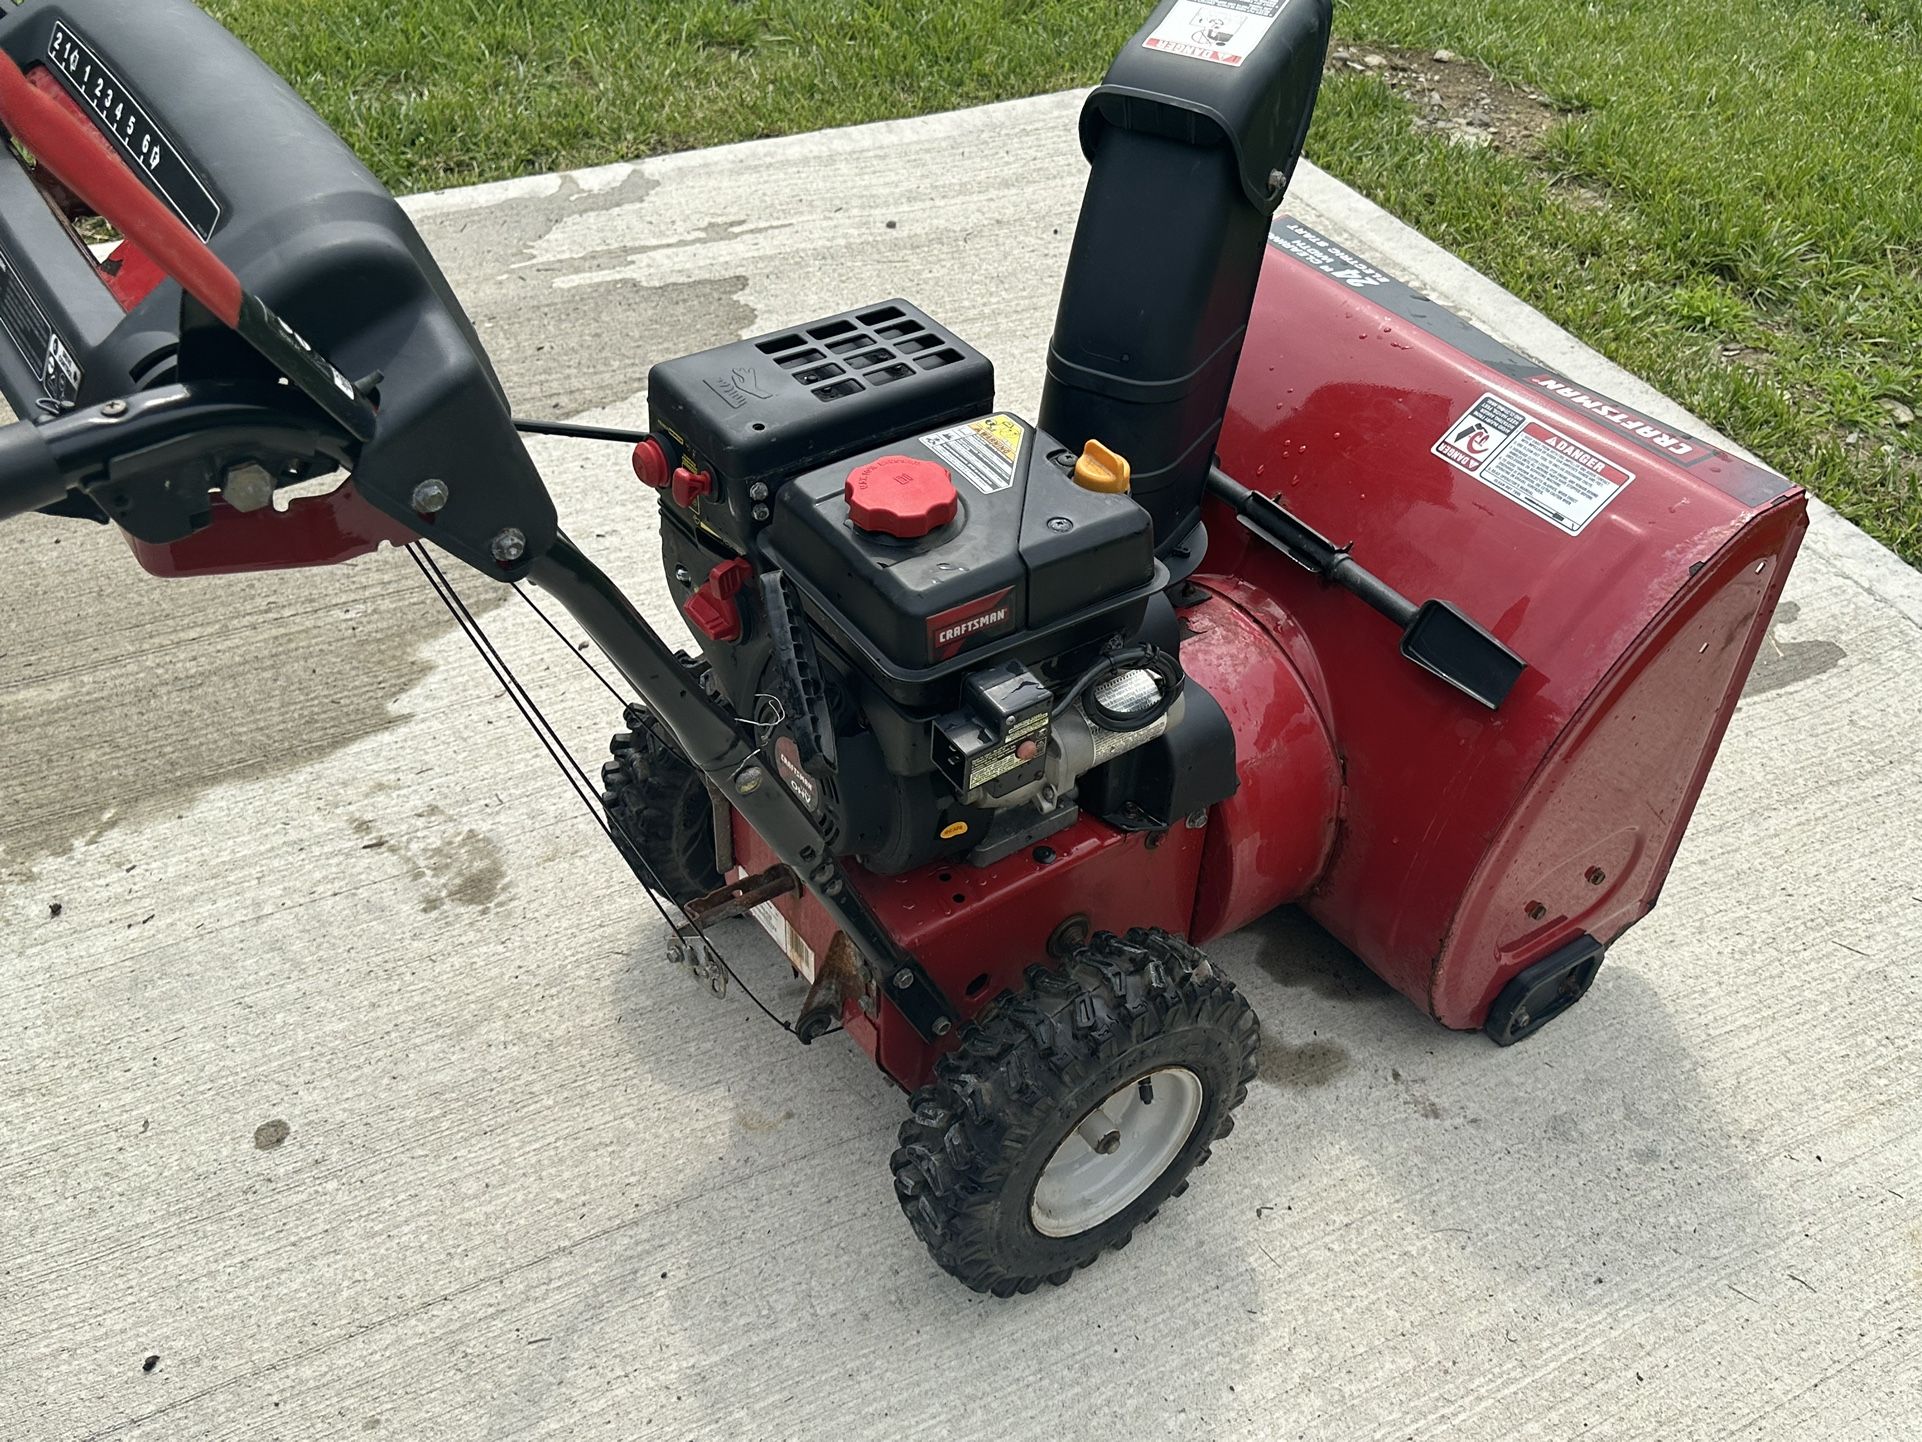 24" CRAFTSMAN 179CC OHV TWO STAGE SELF PROPELLED SNOW BLOWER $600 RETAILS OVER $1068